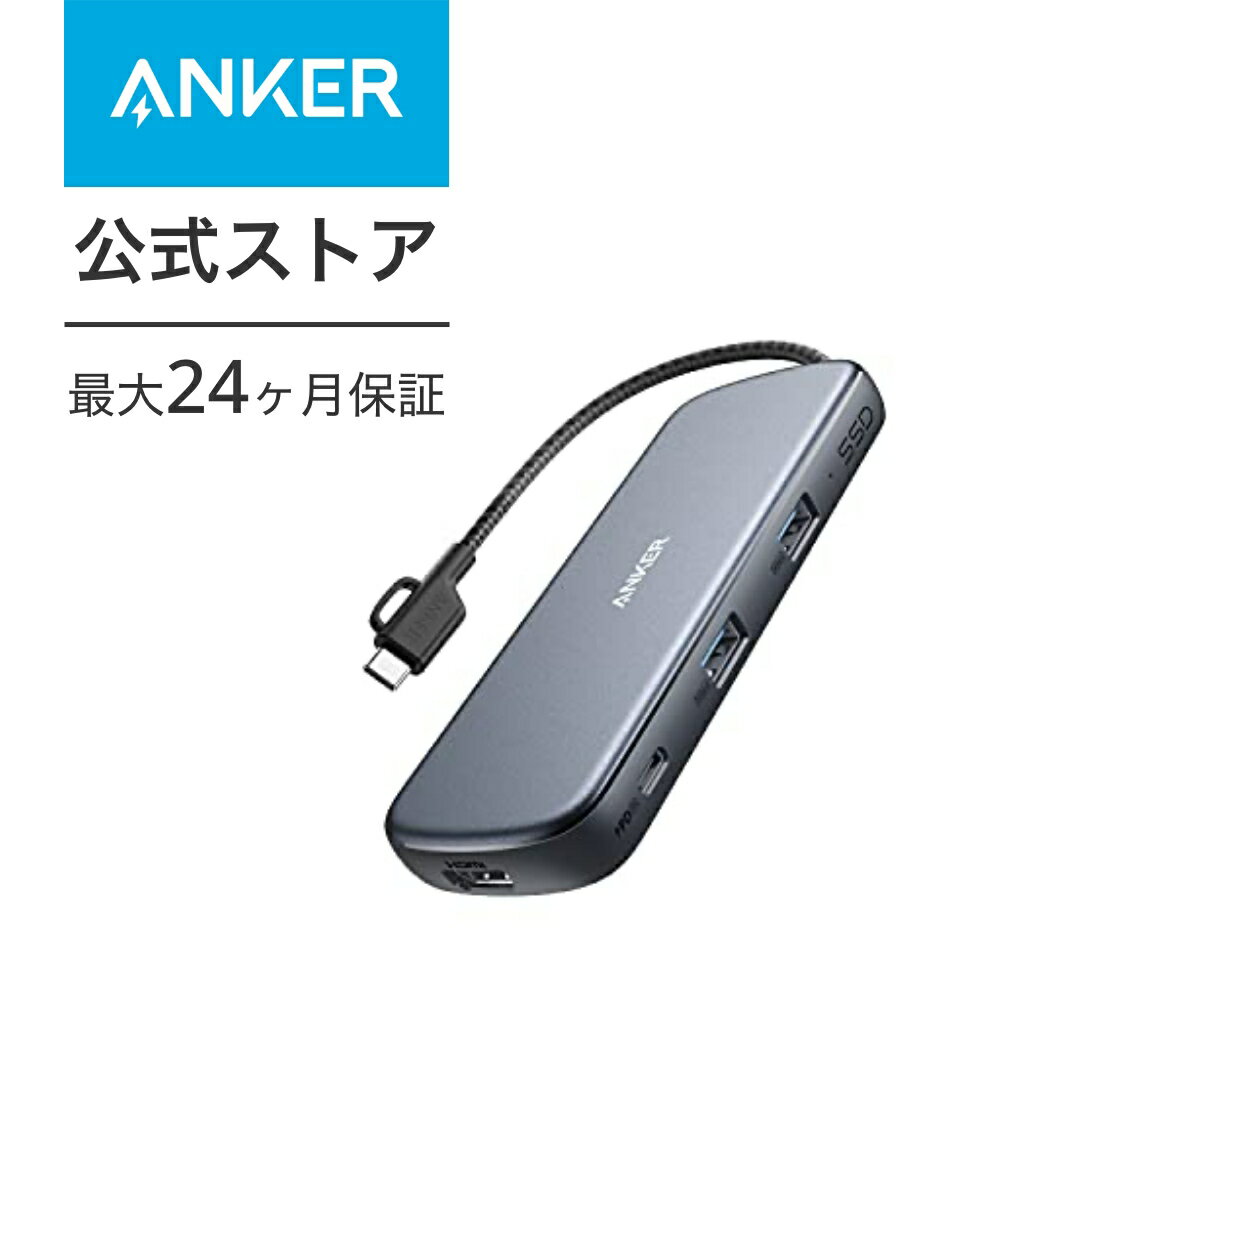 【10%OFF 10/17まで】【あす楽対応】Anker PowerExpand 4-in-1 USB-C SSD ハブ (256GB) SSDストレージ内蔵 ...